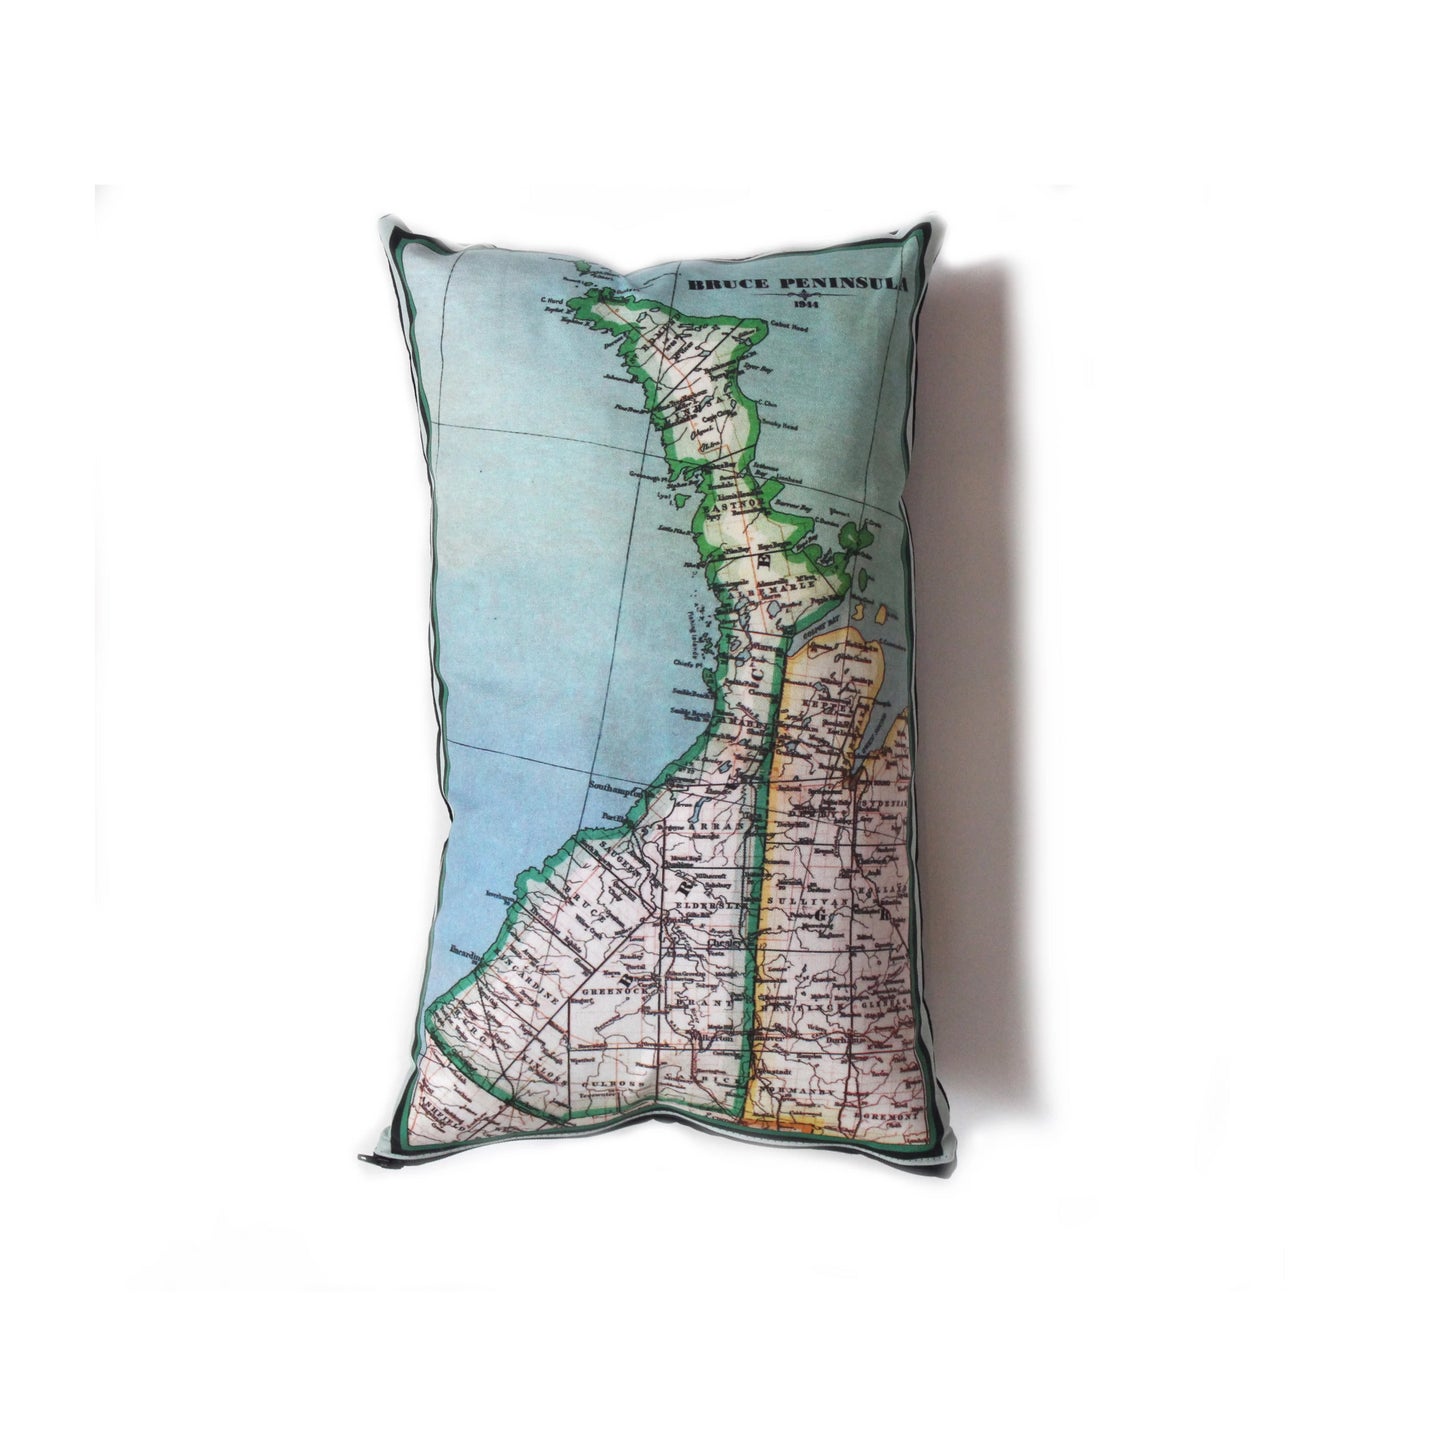 Made in Canada linen pillow case with hand printed vintage map of the Bruce Peninsula and the Grey Highlands in Ontario, Canada, surrounded by Lake Huron and Georgian Bay.